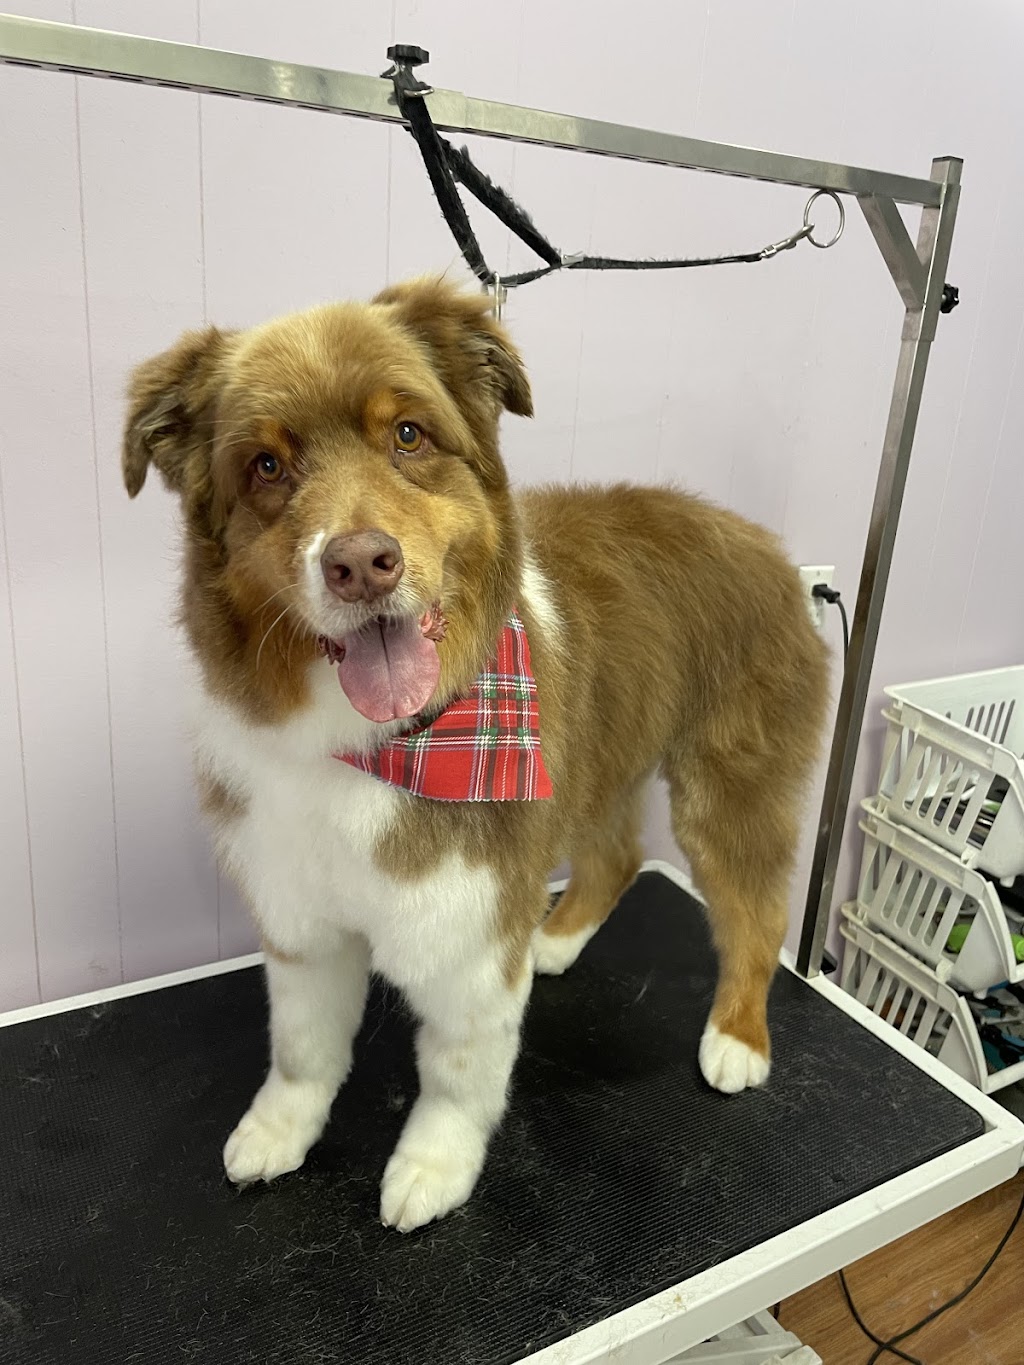 On The Go Dog Grooming | point of interest | 66 Main St E, Dundalk, ON N0C 1B0, Canada | 5192174479 OR +1 519-217-4479